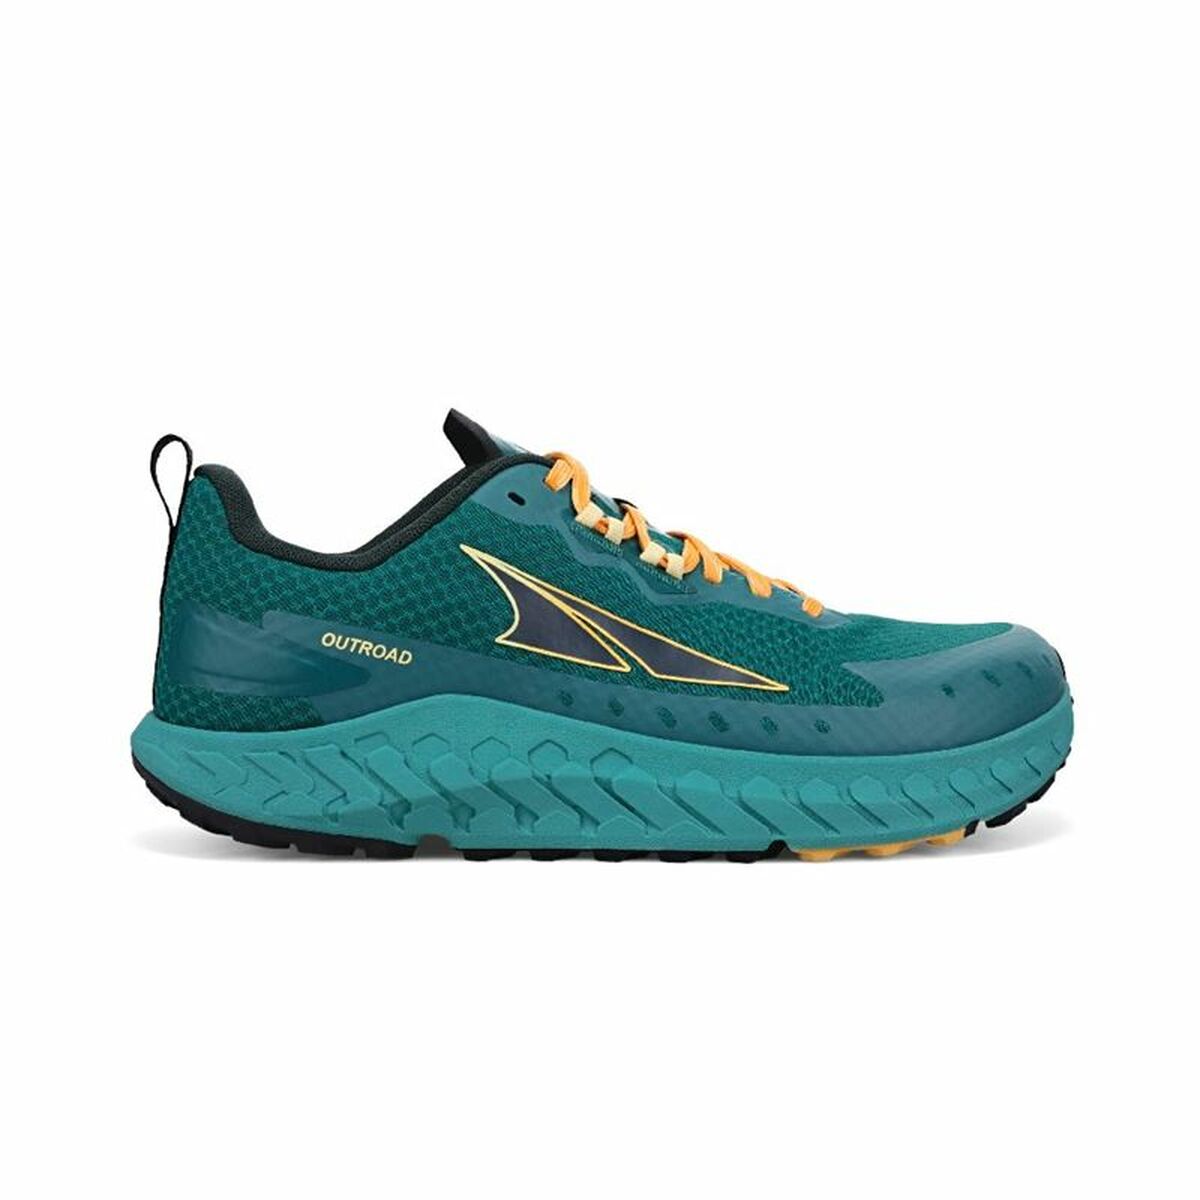 Chaussures de Running pour Adultes Altra Outroad Cyan Homme